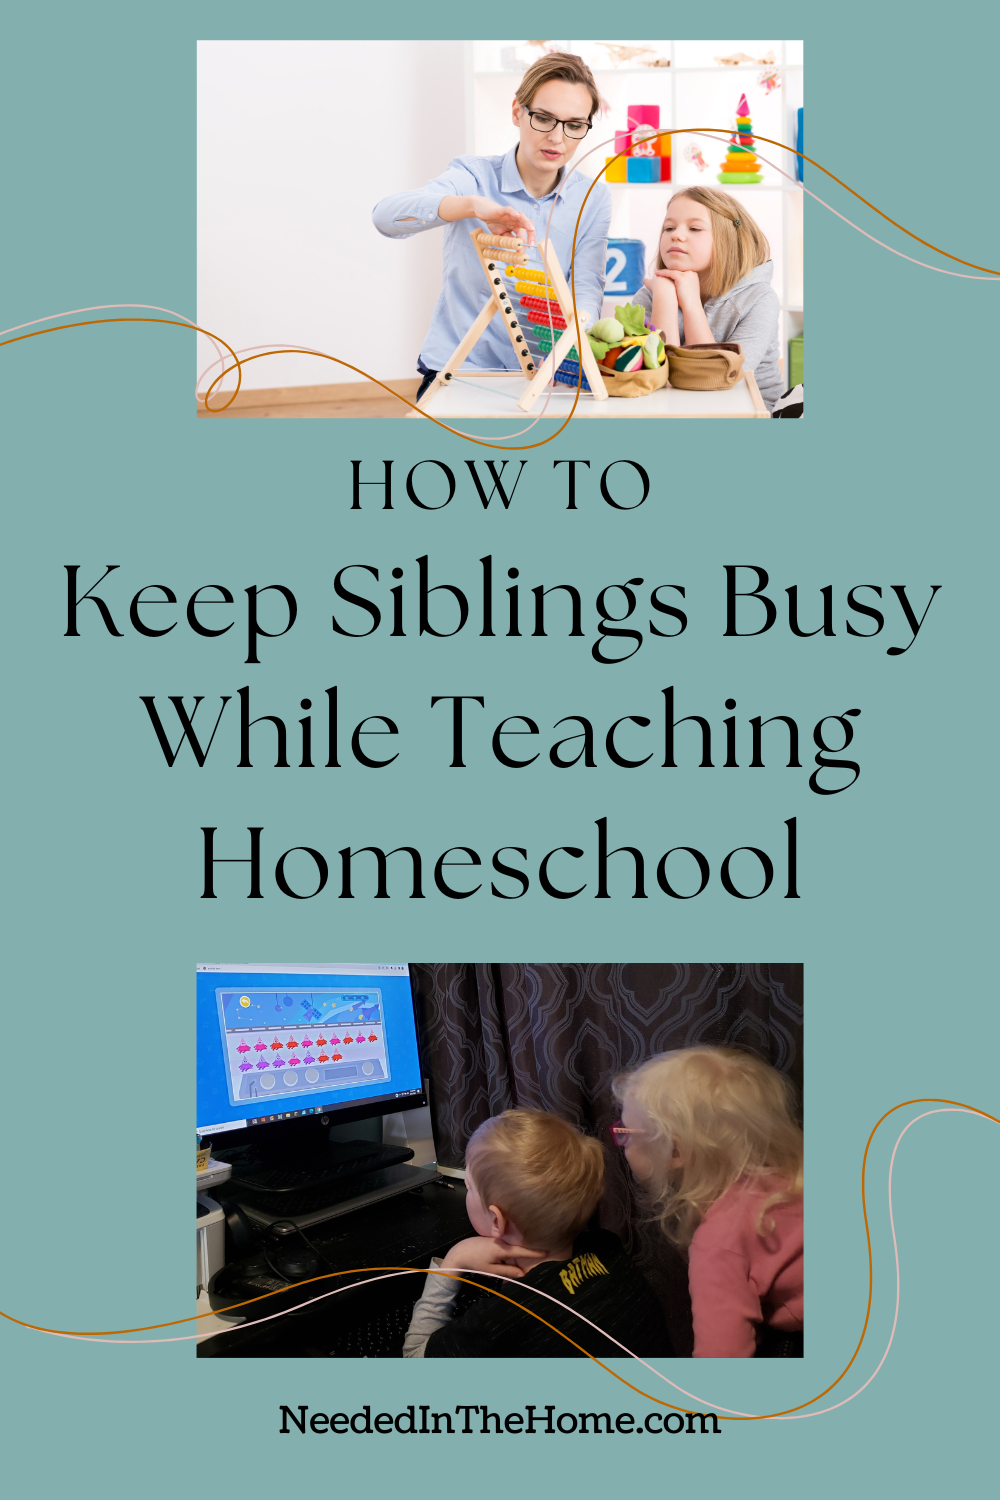 pinterest pin description how to keep siblings busy while teaching homeschool mom daughter using abacus two small children educational computer program neededinthehome